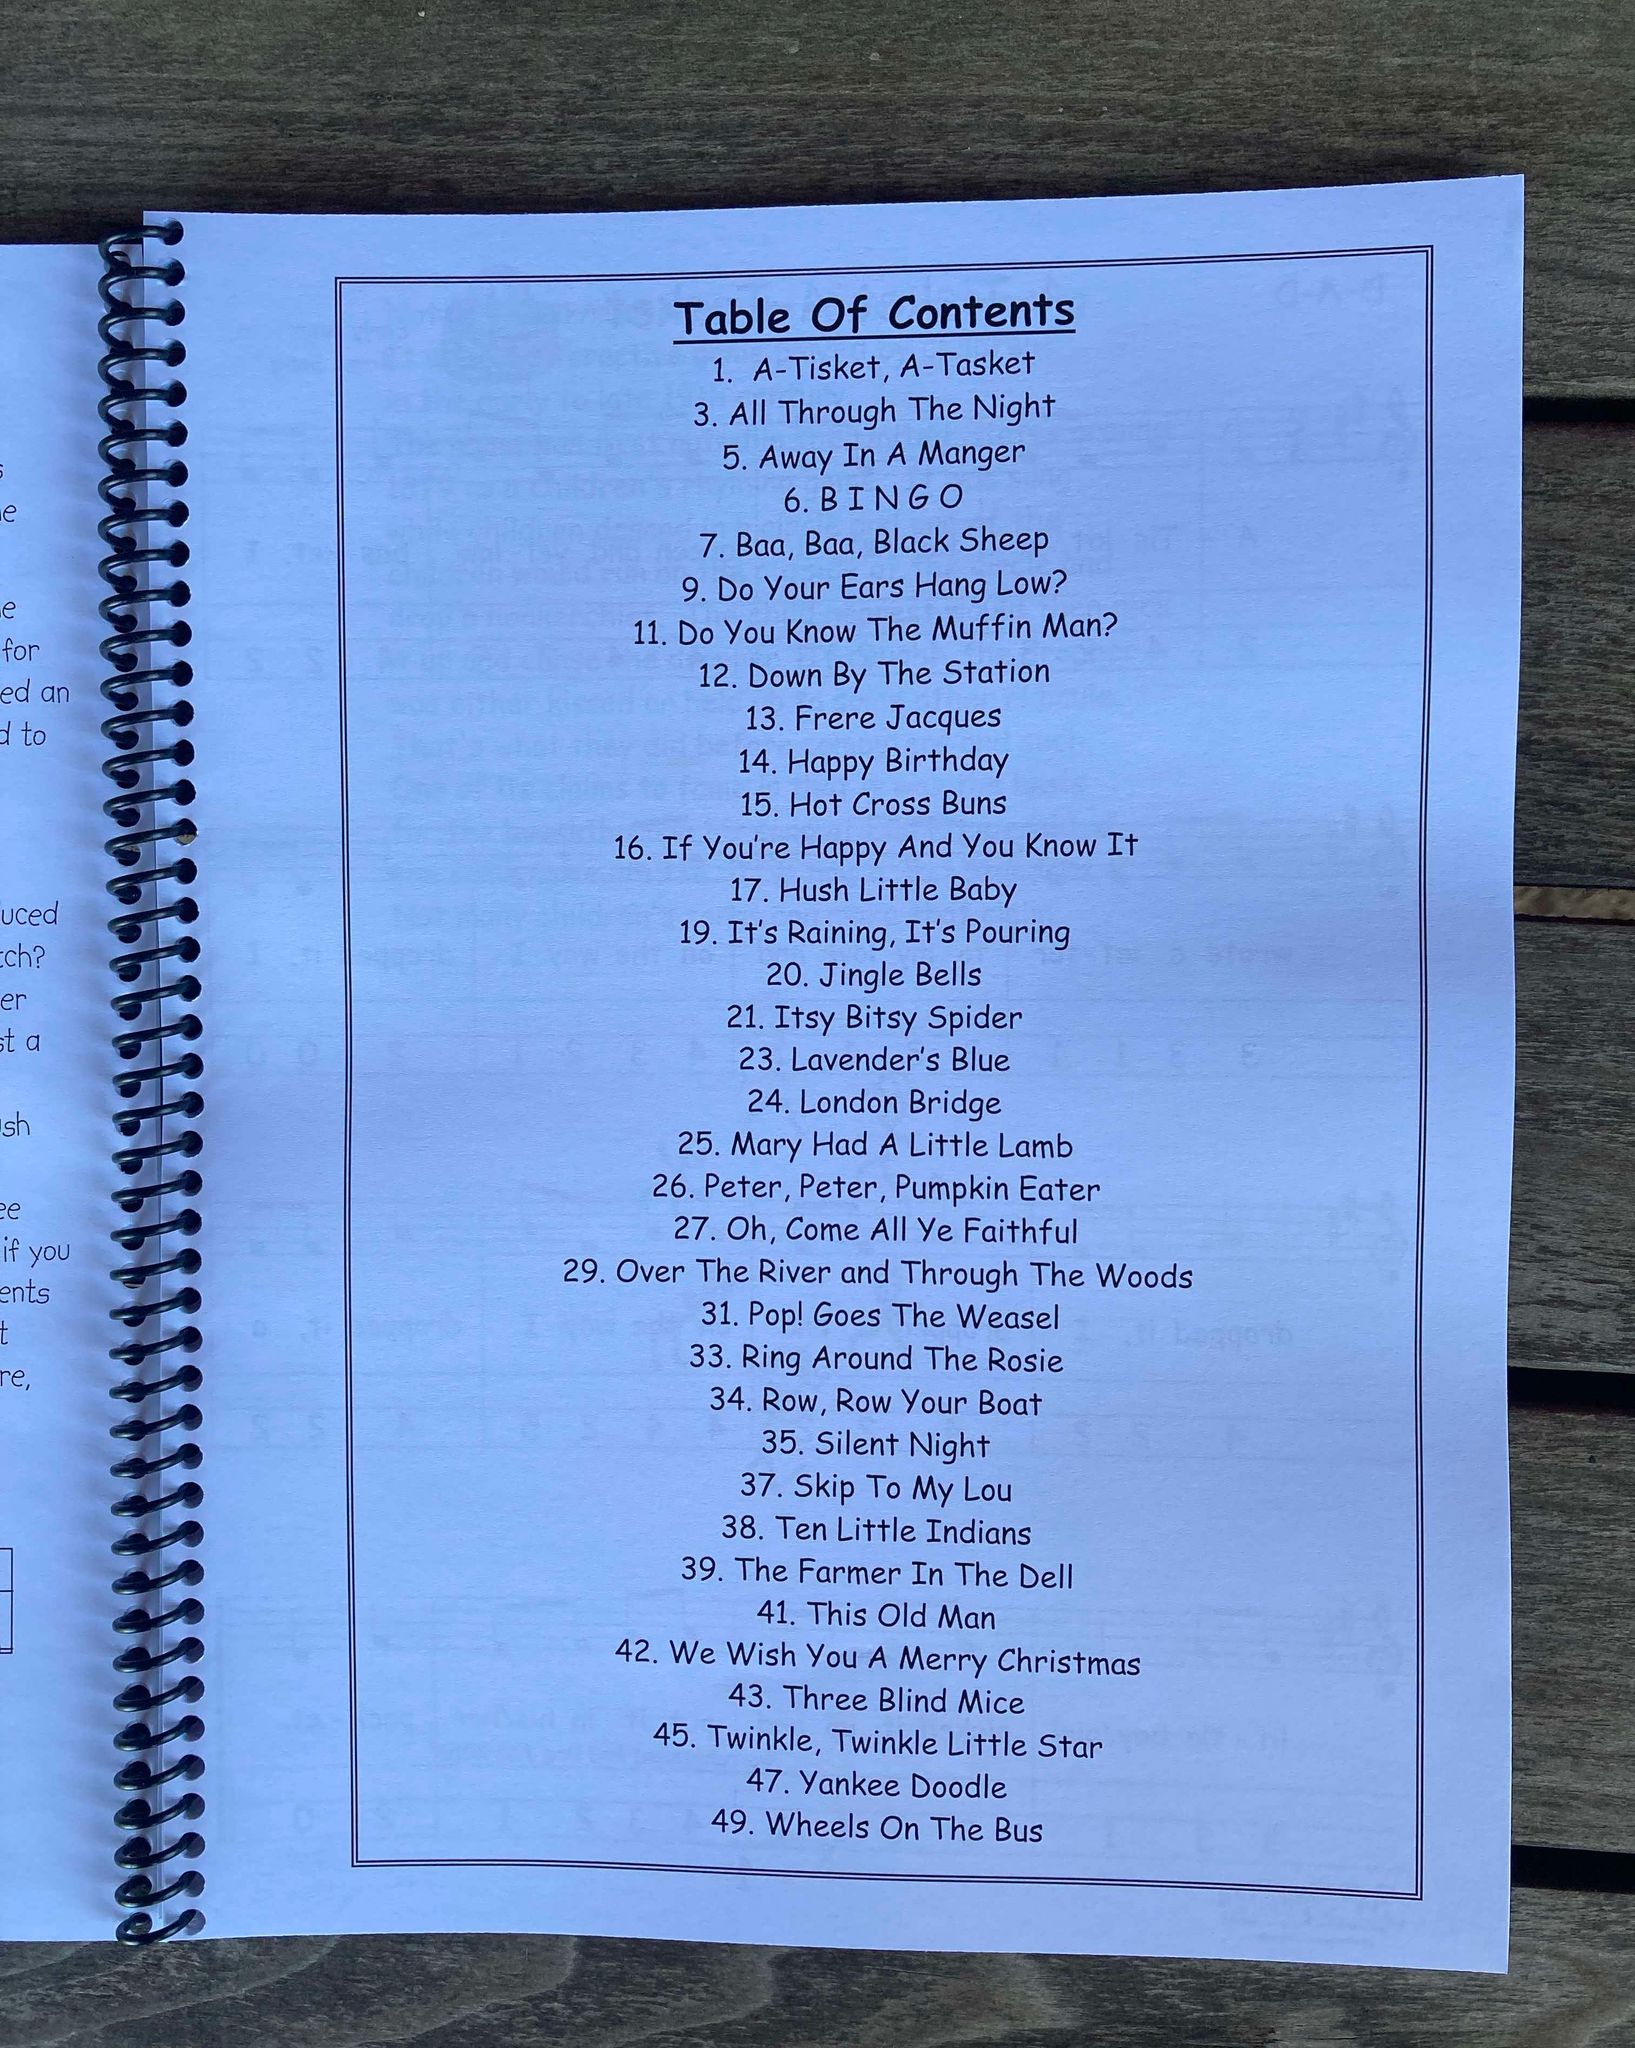 Table of contents of a beginner's book for nursery rhymes, featuring titles like "A-Tisket, A-Tasket," "Do You Know The Muffin Man?" and "The Ants Go Marching." The page, designed with Grandpa's Musical Guide Book by Red Dog Jam, is spiral-bound and laid on a wooden surface.